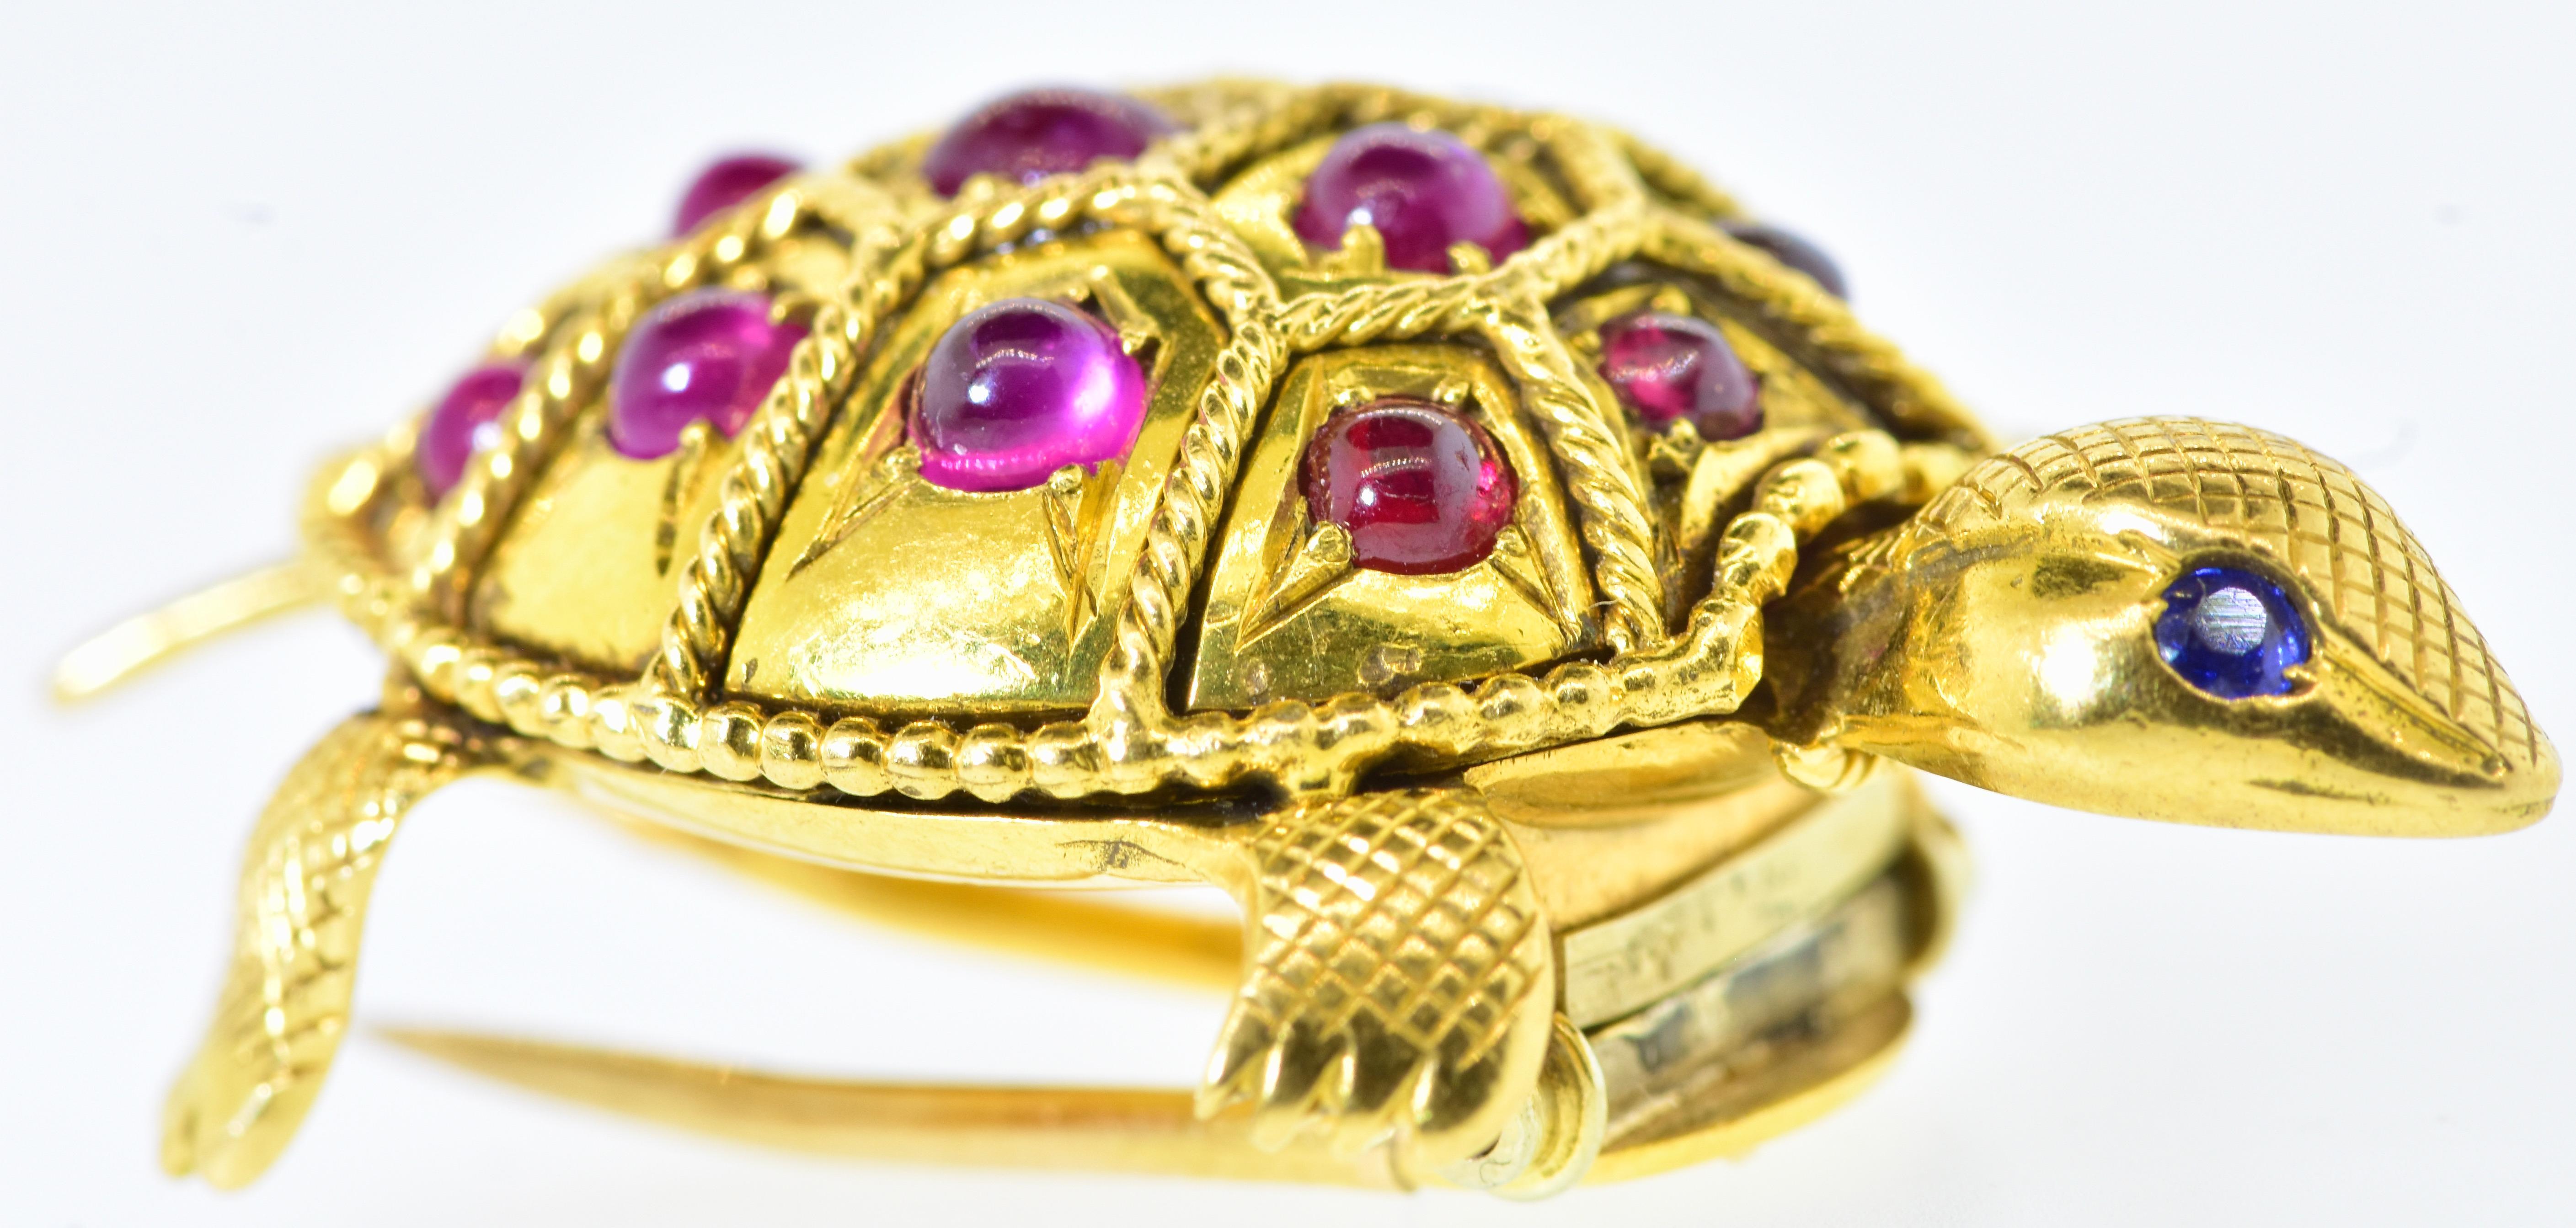 French Turtle with Burma Ruby & 18K Yellow Gold Double Clip Brooch, C. 1950